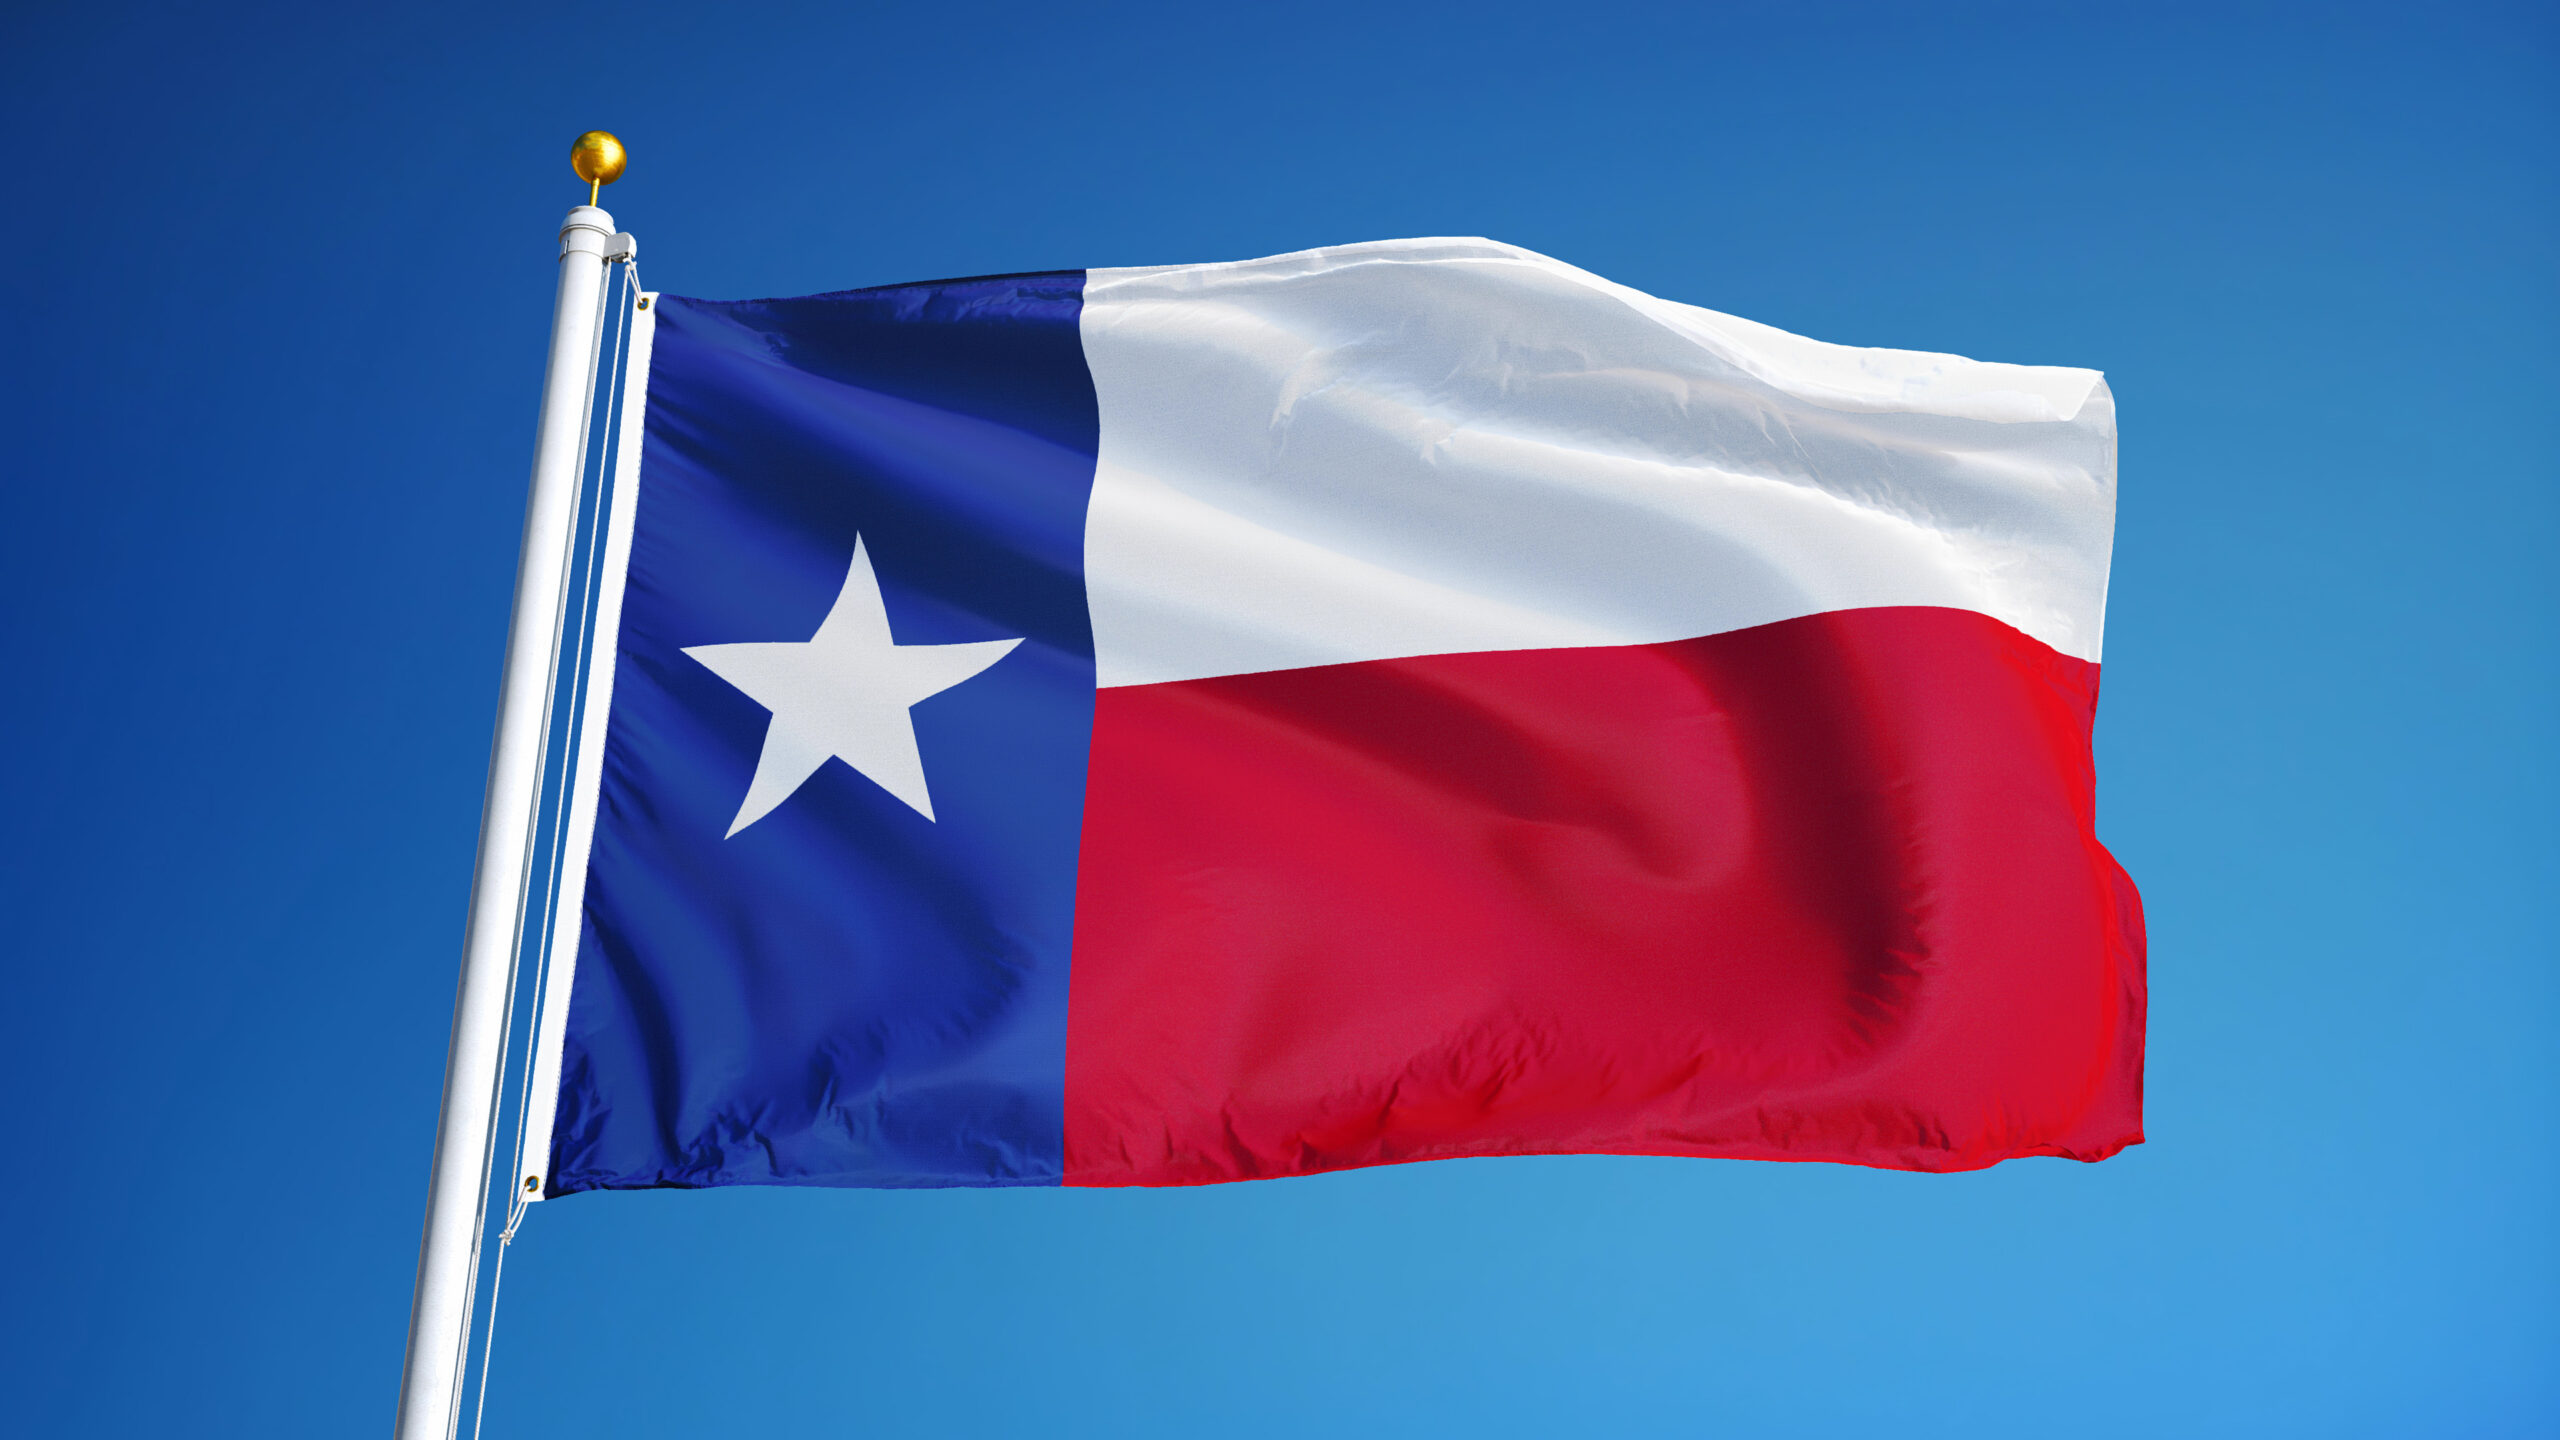 Texas will remain a red state but we must stay vigilant.